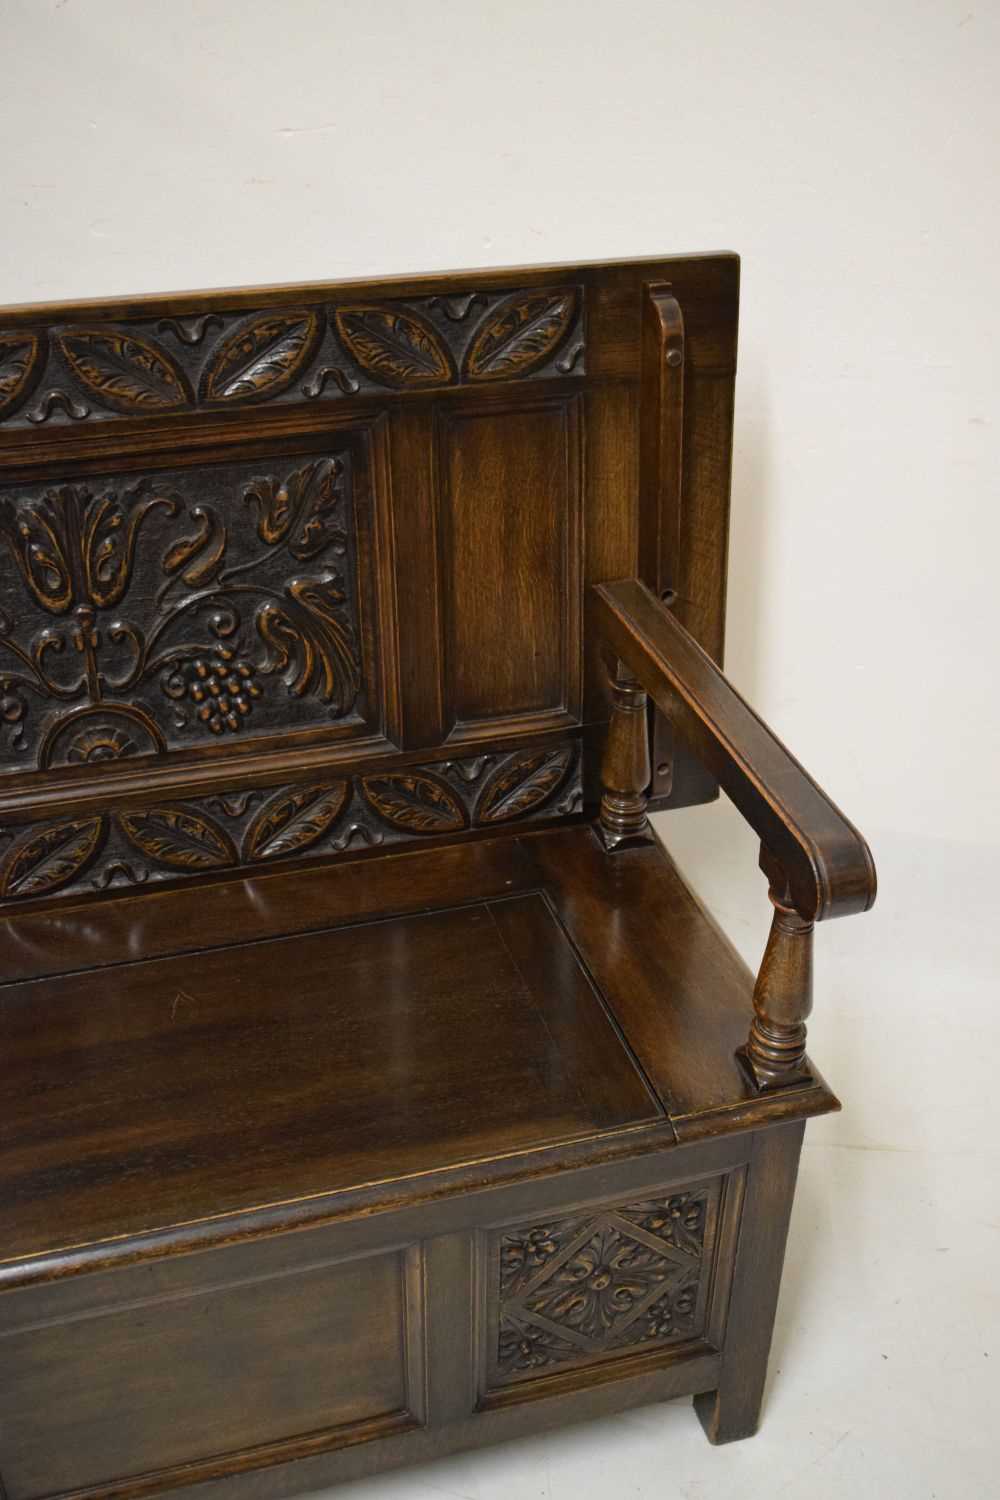 Early 20th Century oak monks bench - Image 3 of 6